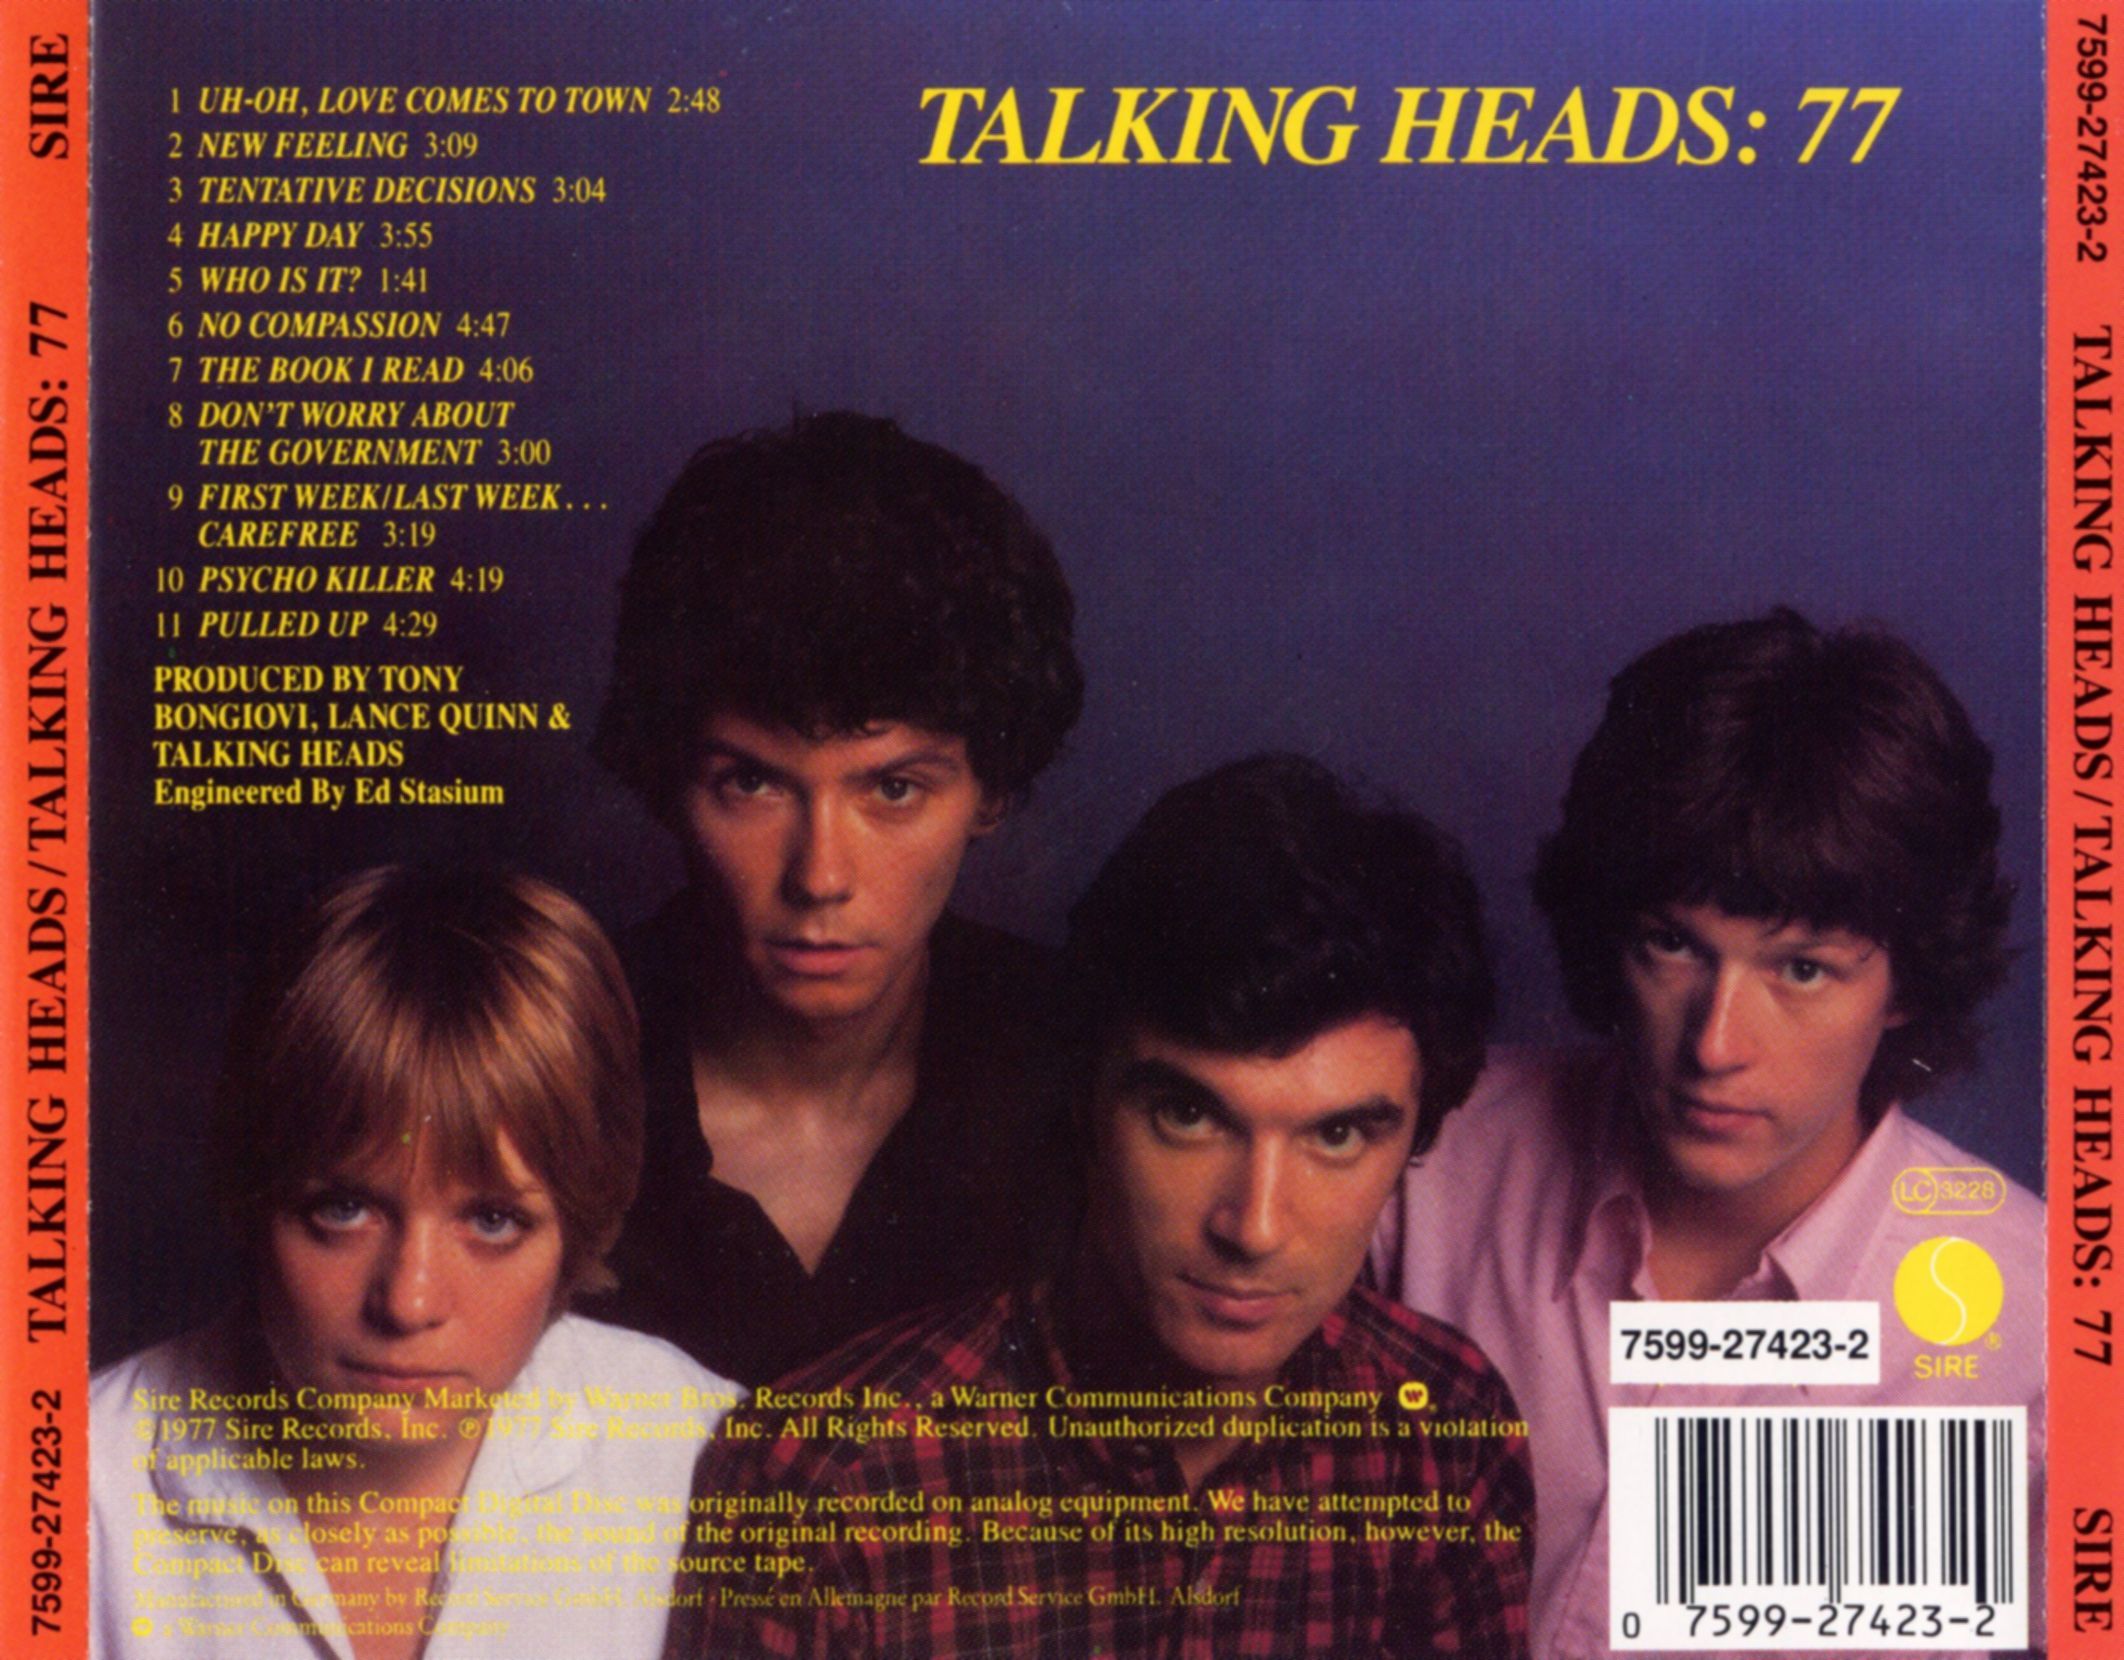 Talking Heads 77 back cover